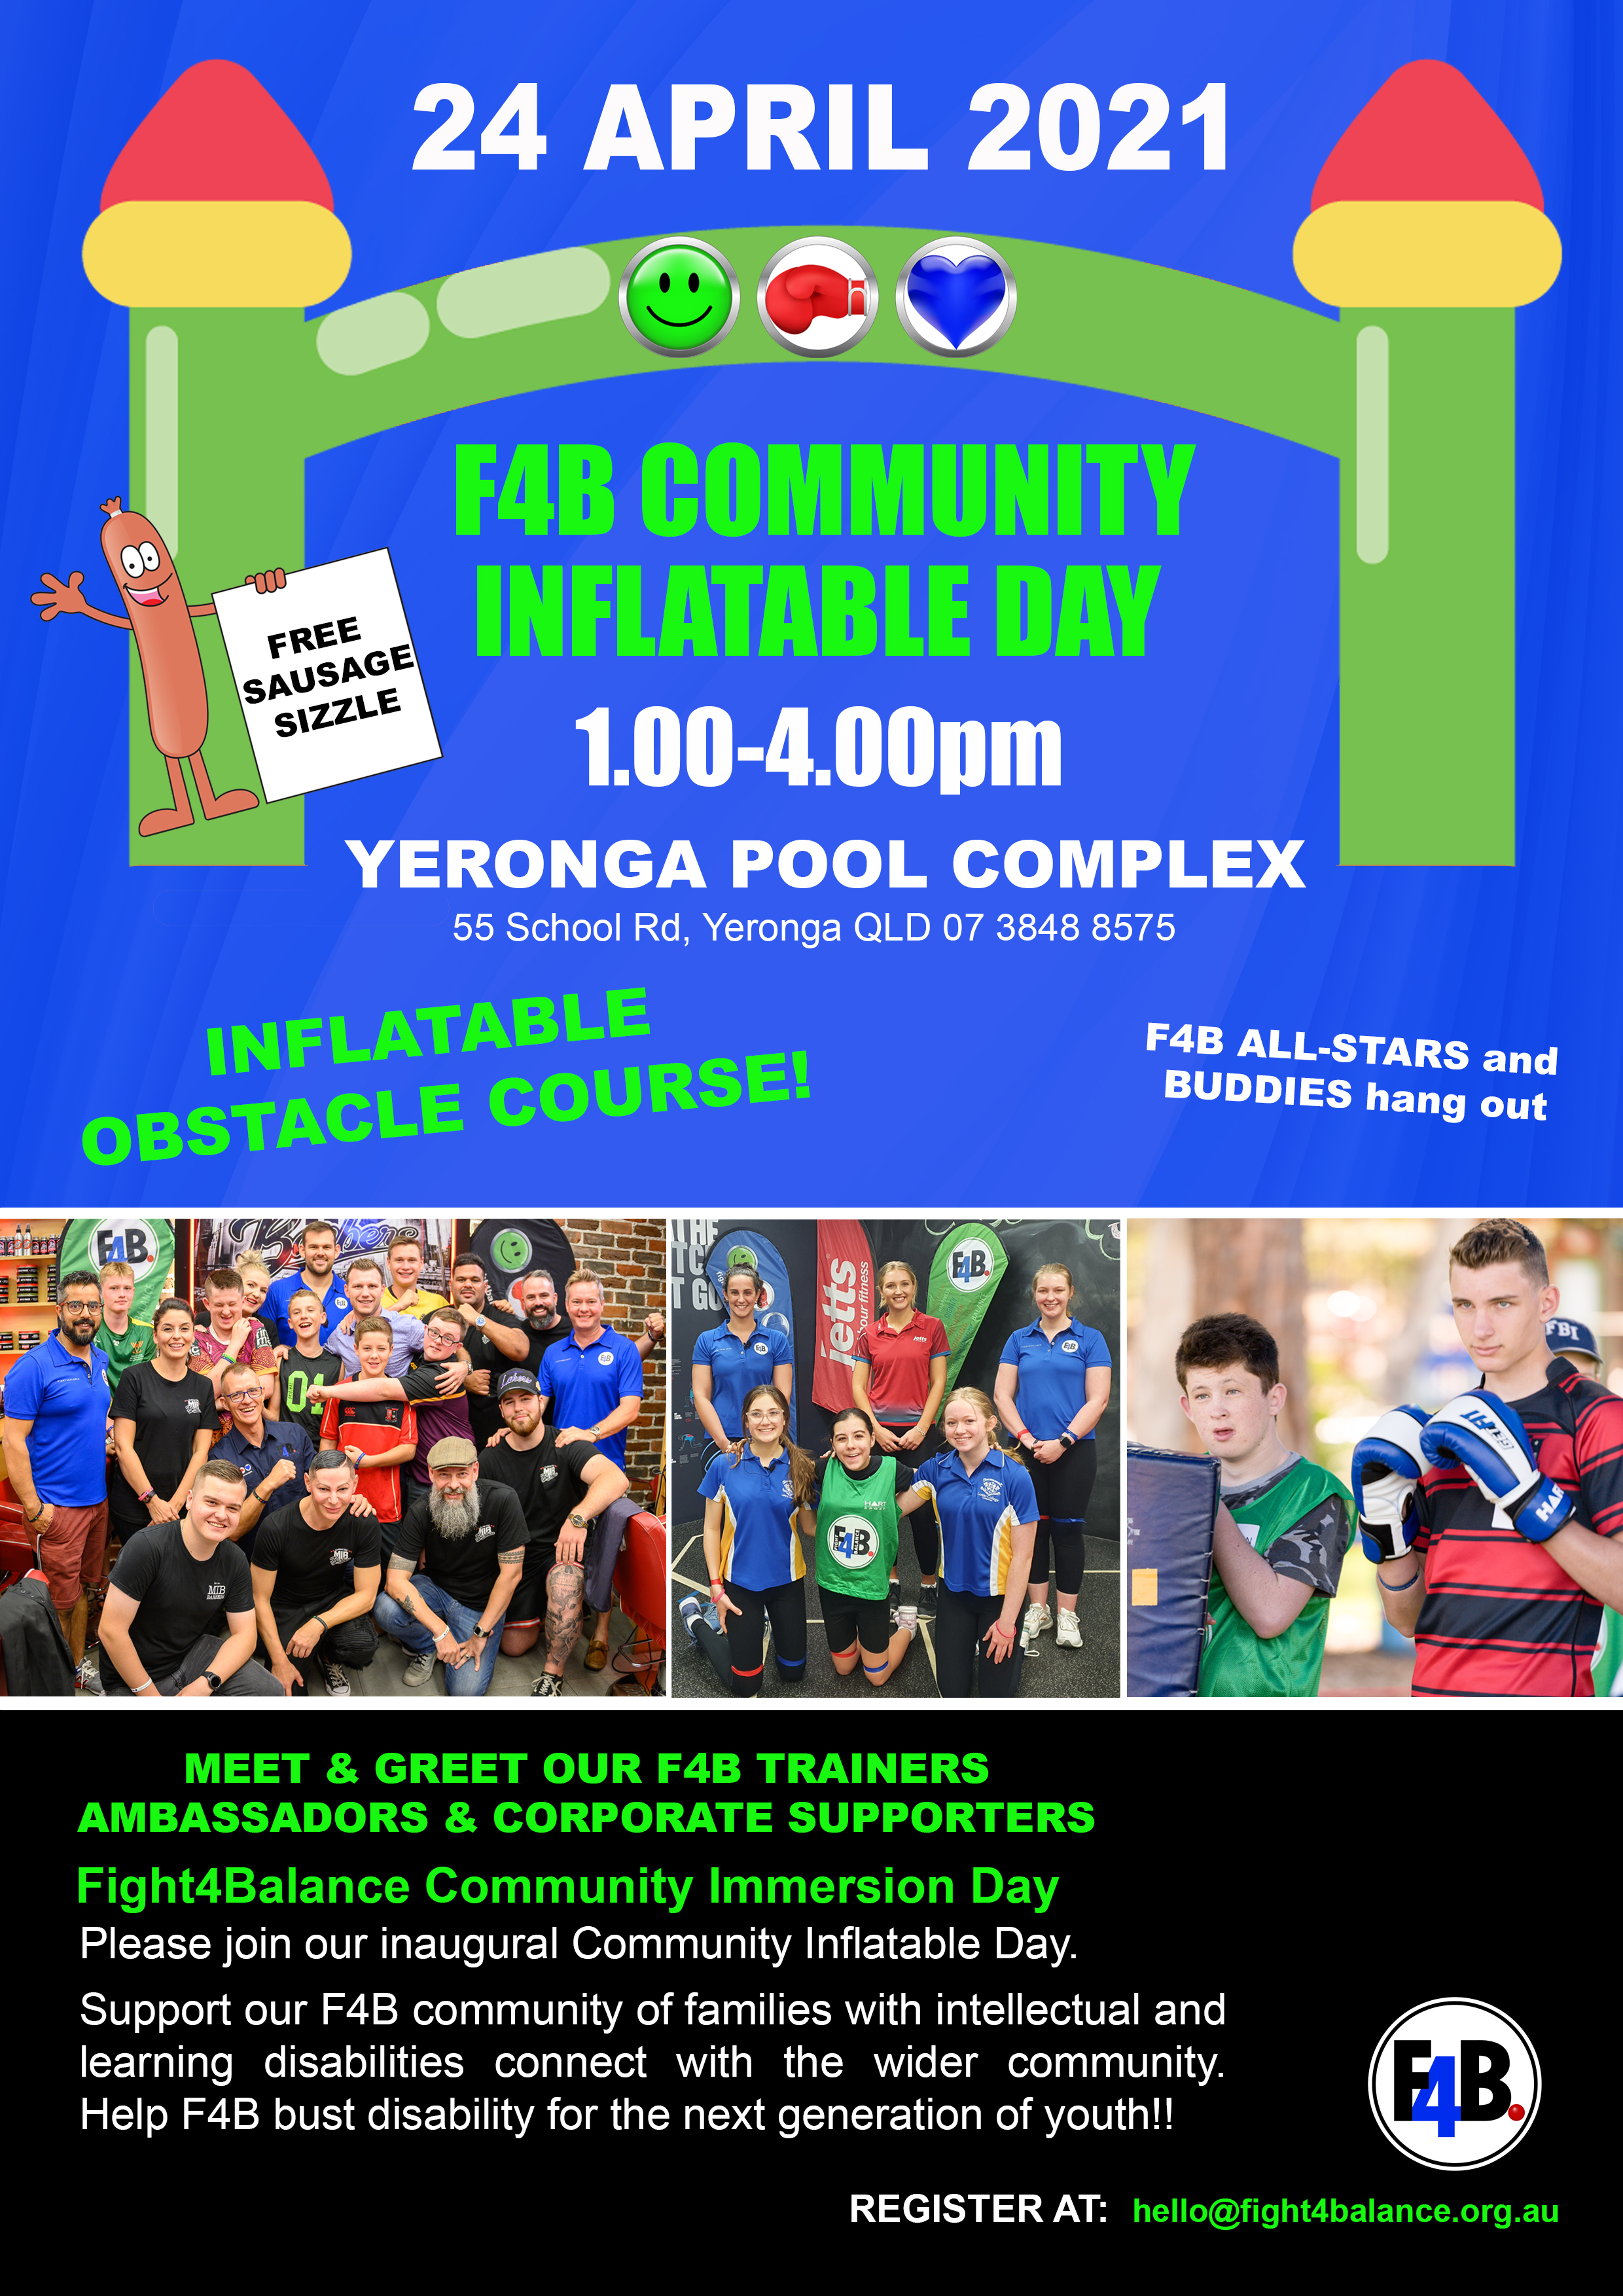 COMMUNITY INFLATABLE DAY